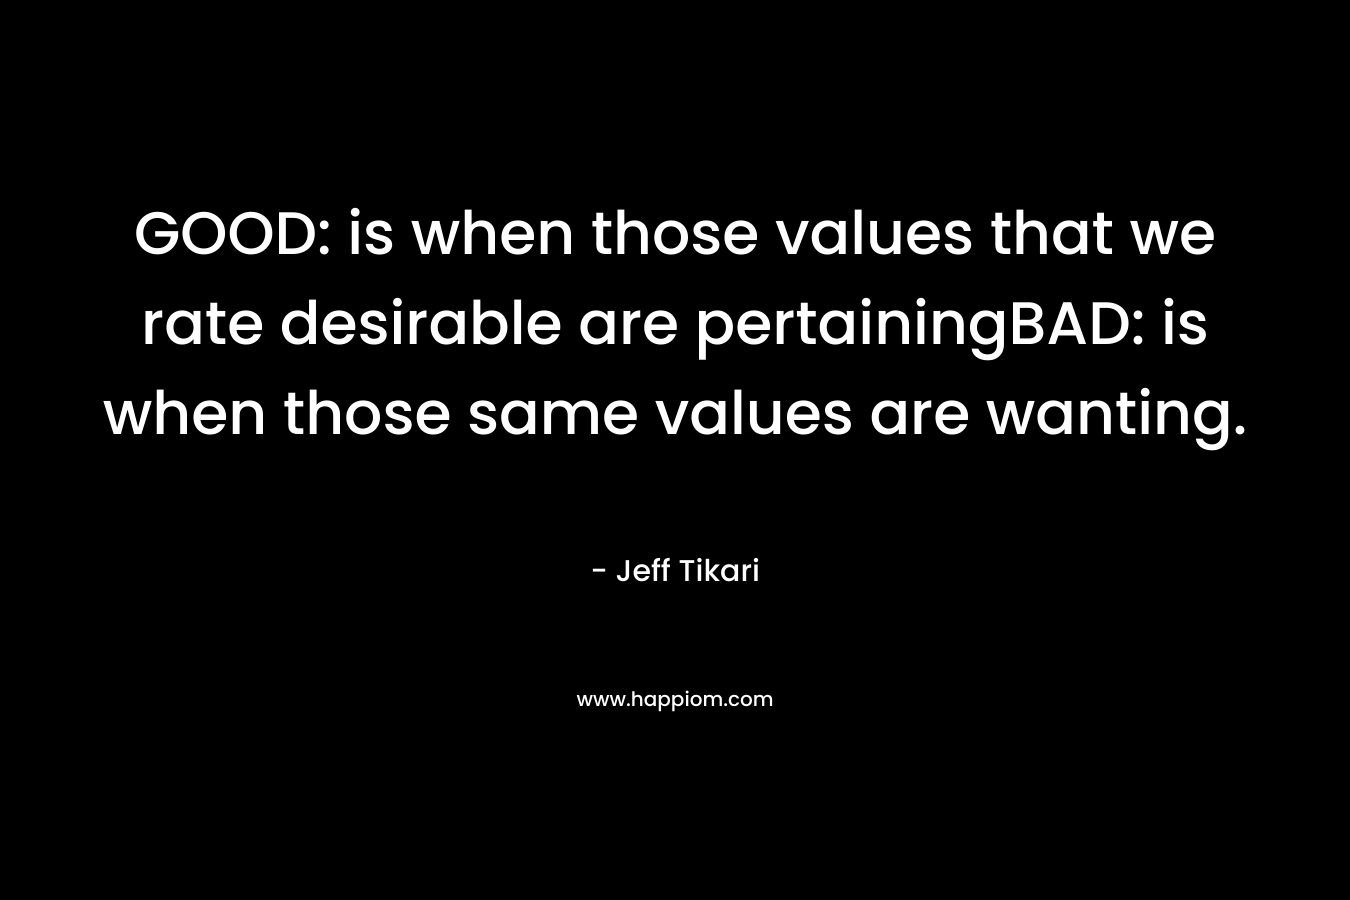 GOOD: is when those values that we rate desirable are pertainingBAD: is when those same values are wanting.